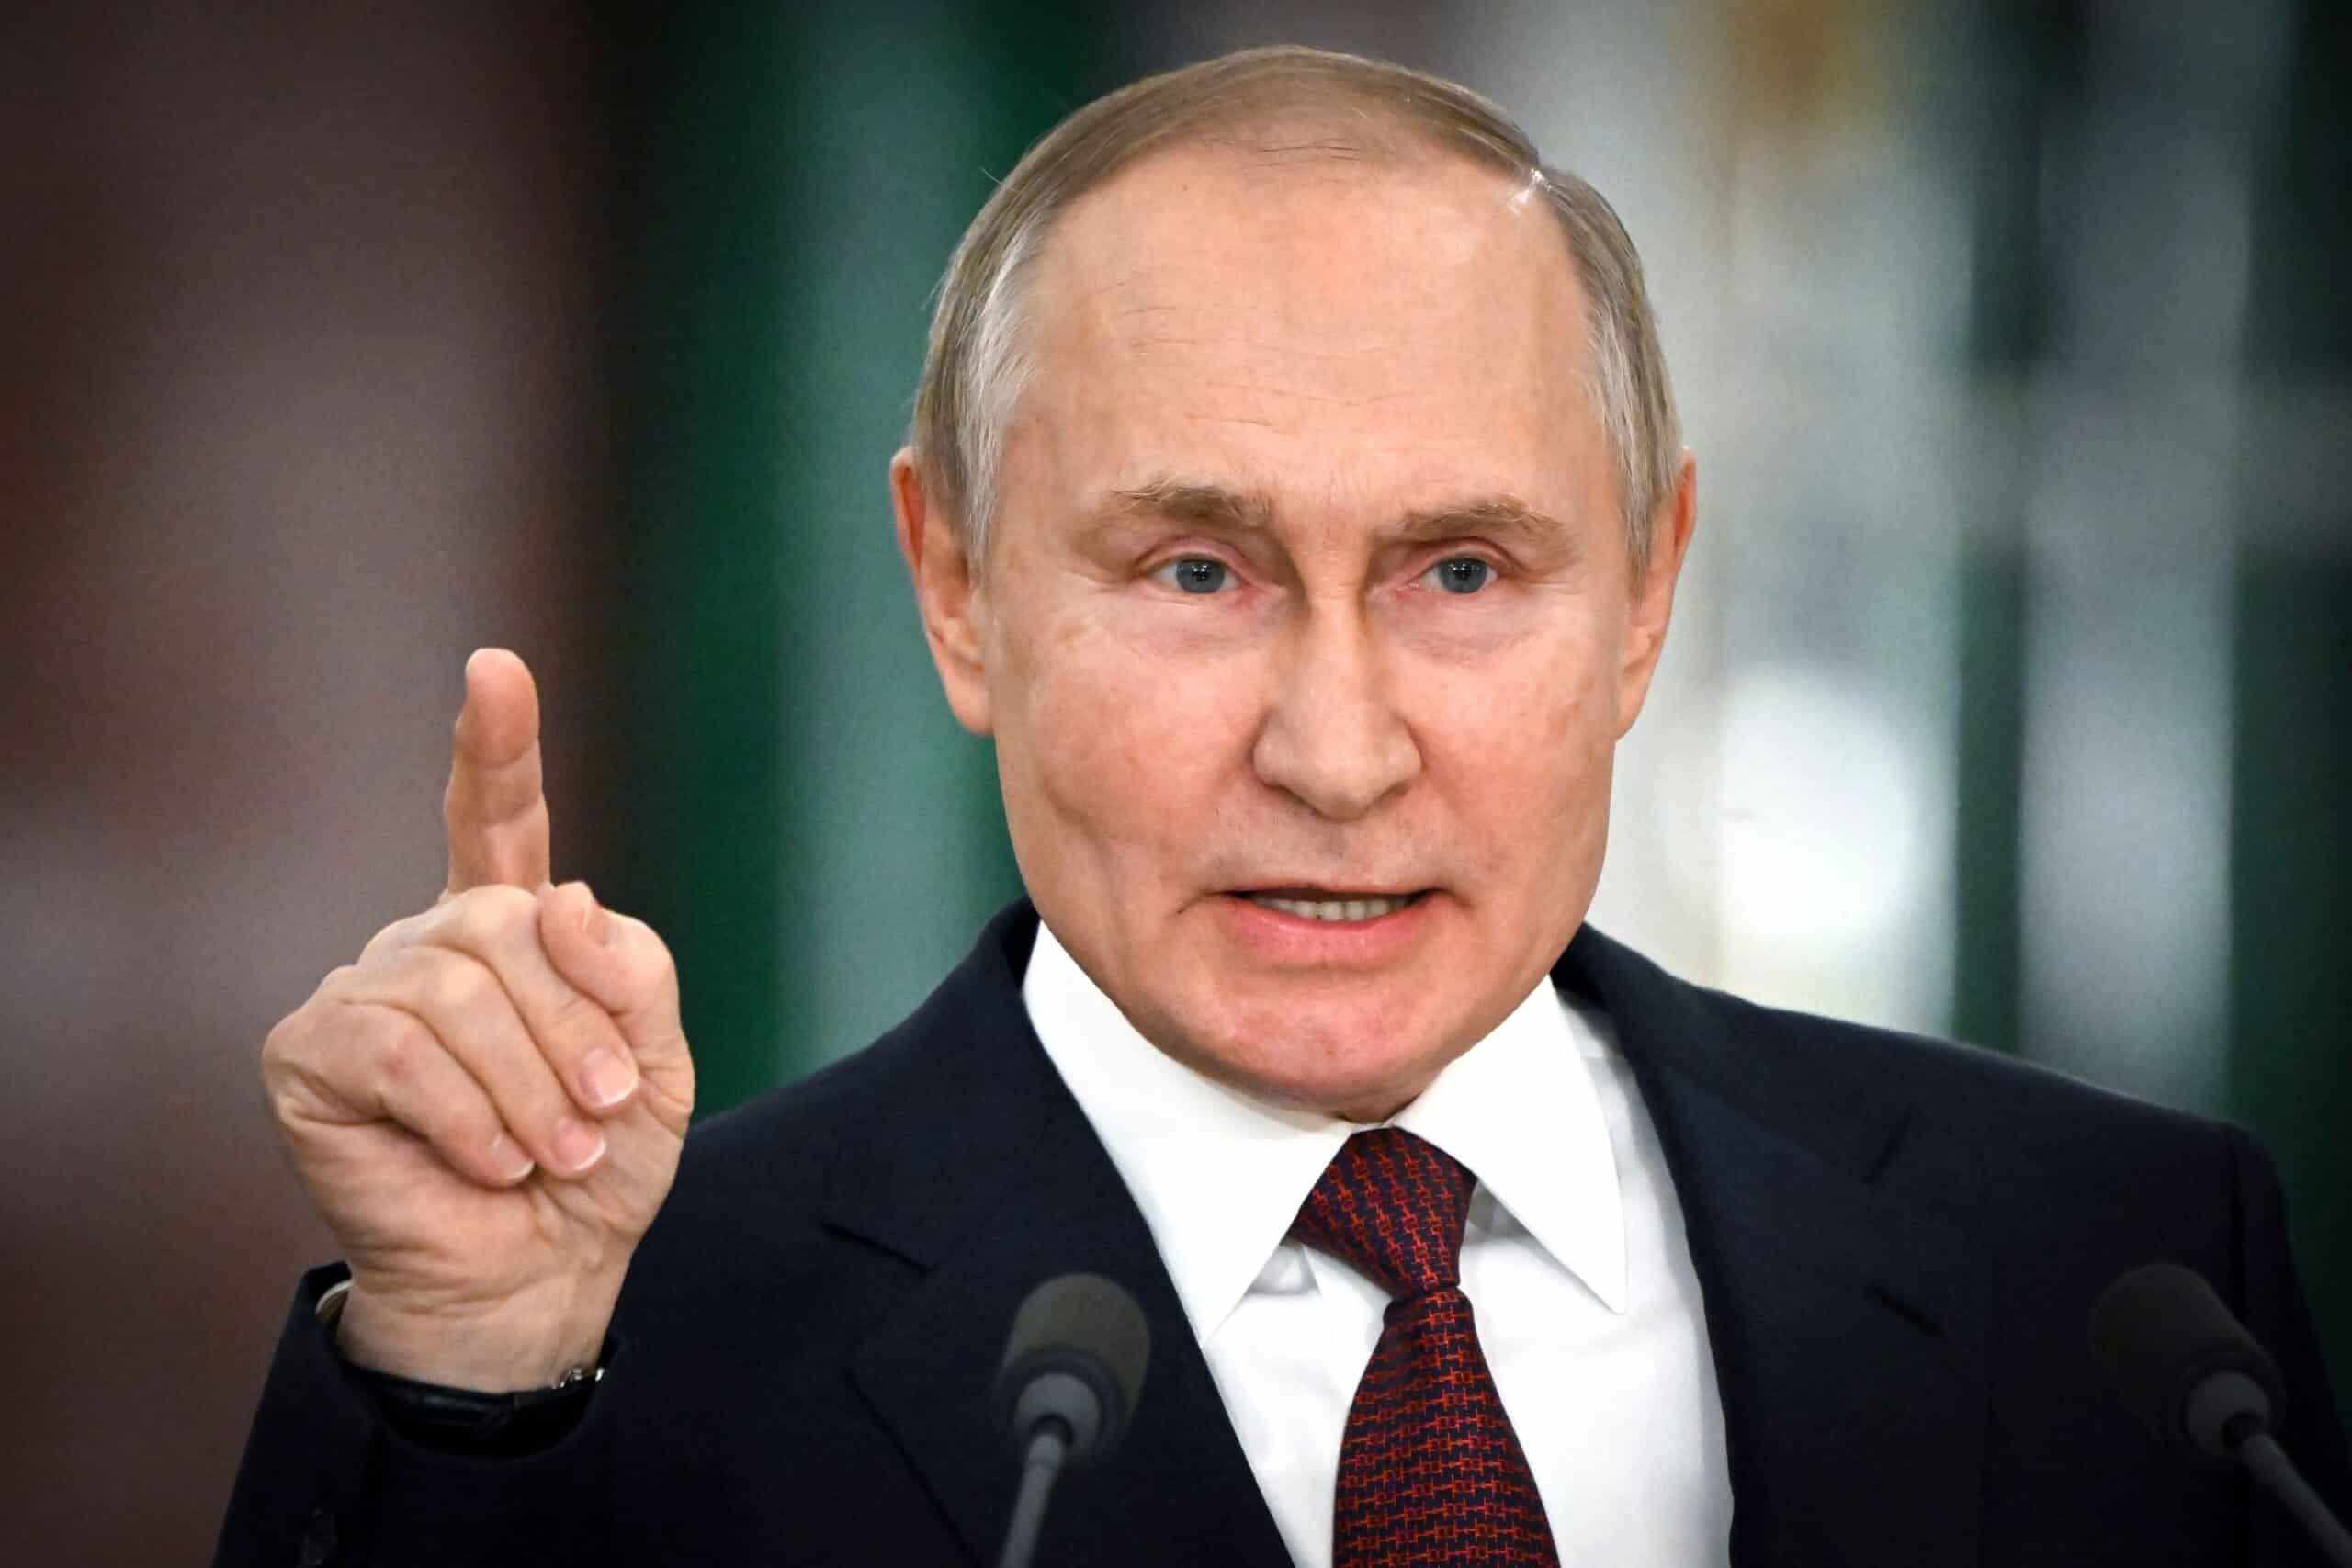 Putin on track for fifth term with nearly 90% of the vote